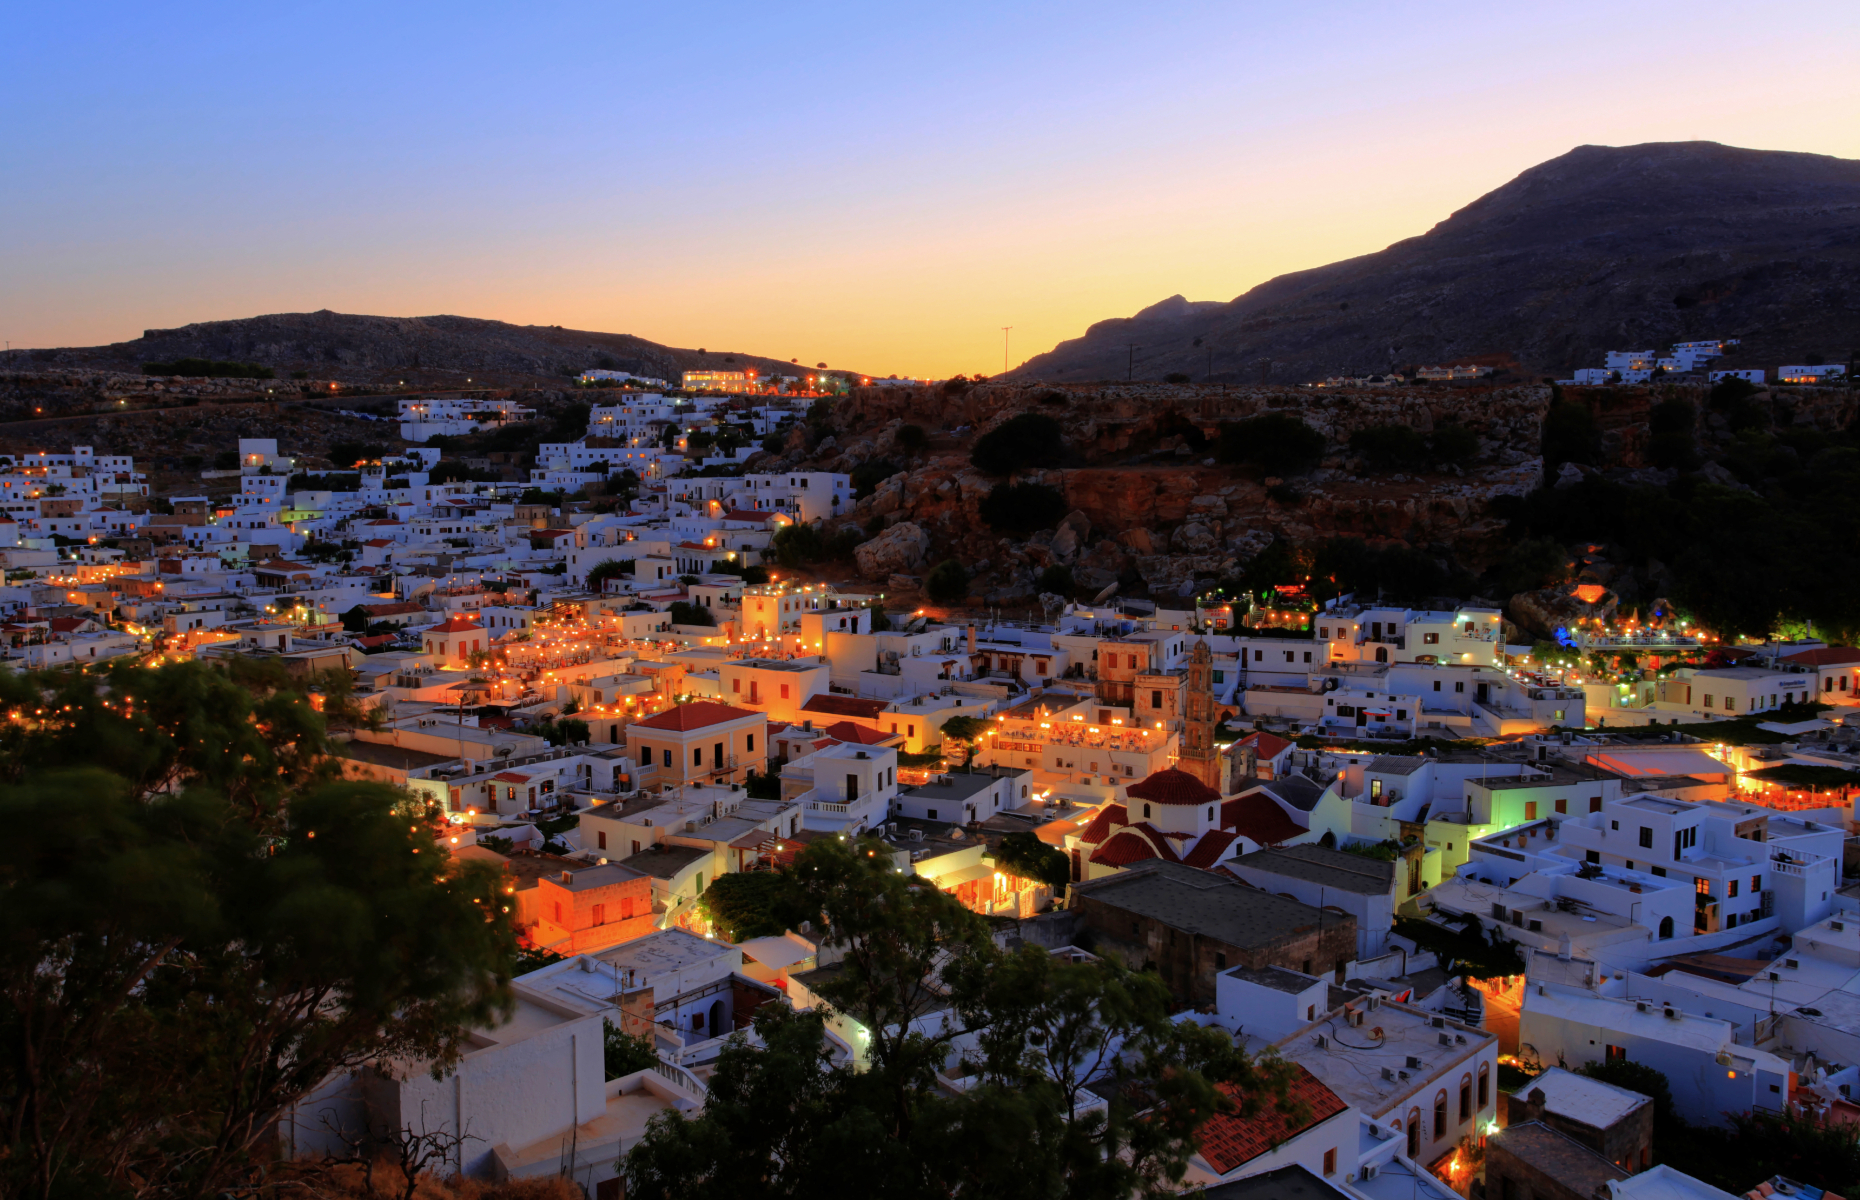 Lindos at night (Ollie Taylor/Shutterstock)